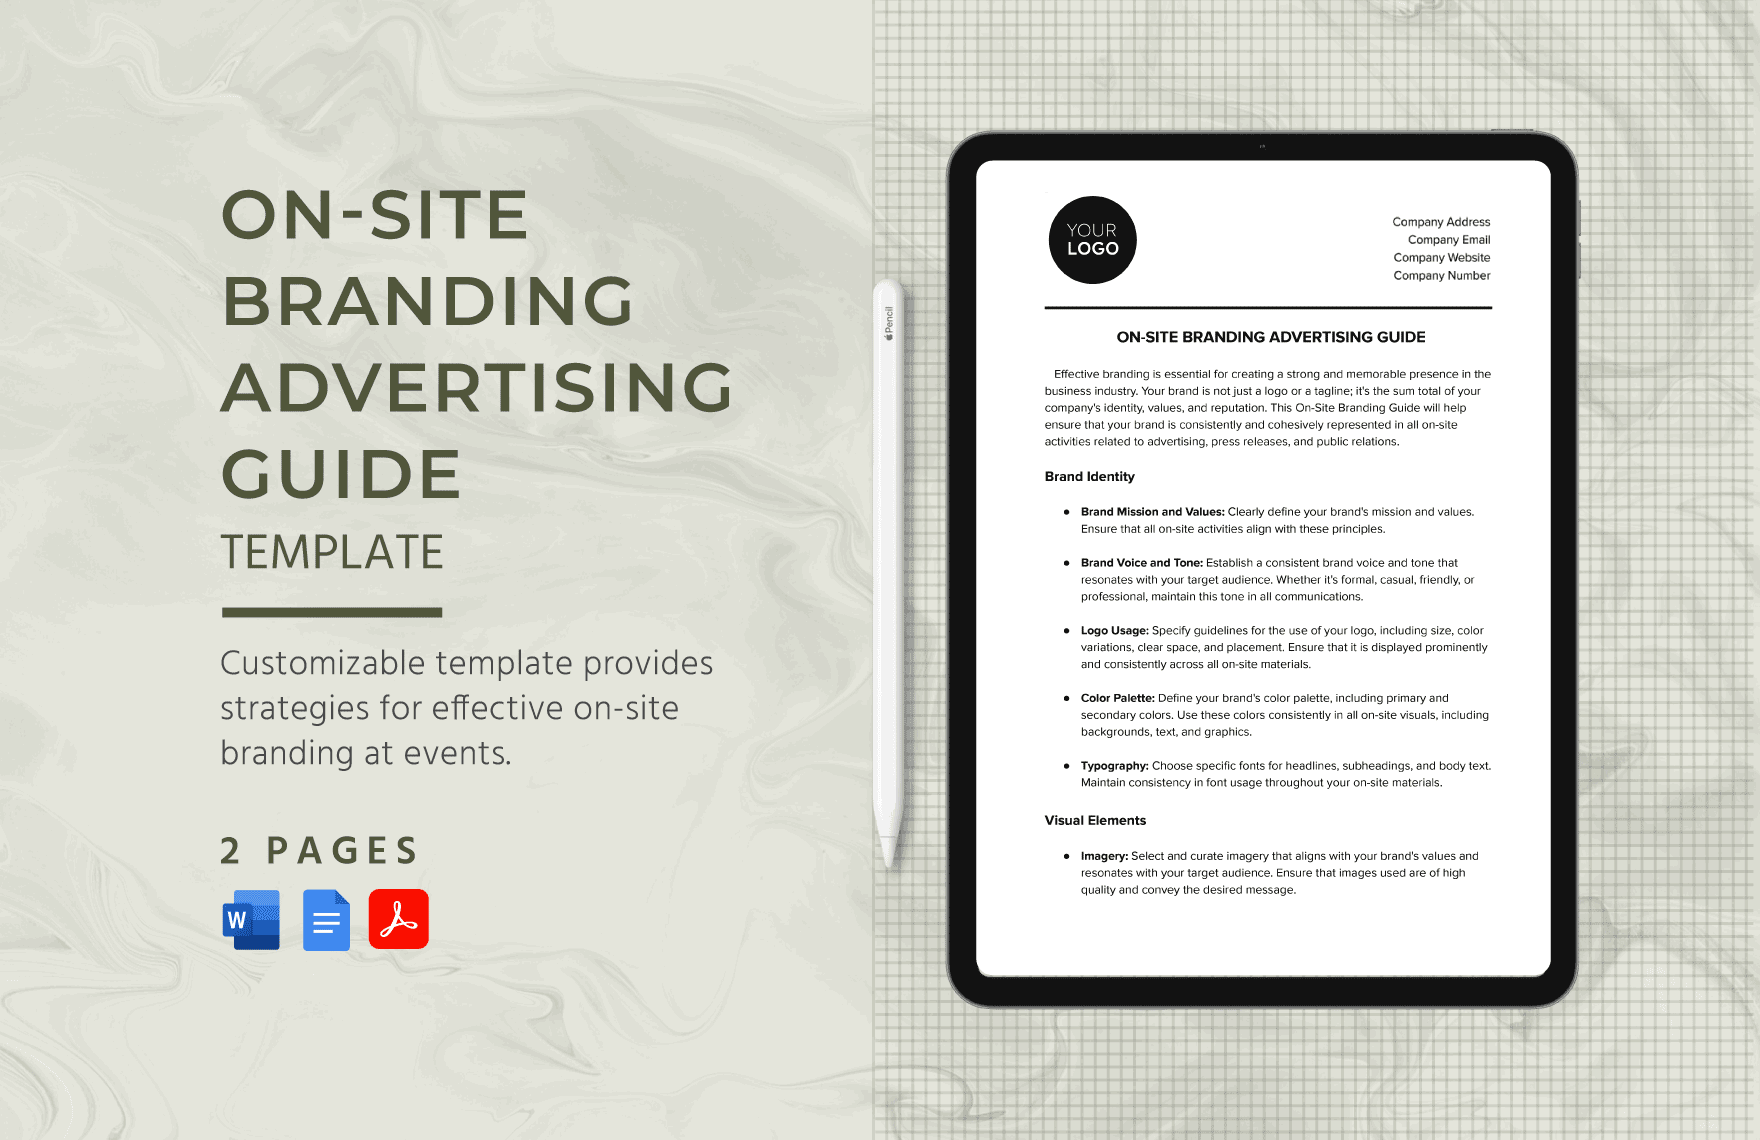 On-Site Branding Advertising Guide Template in Word, Google Docs, PDF